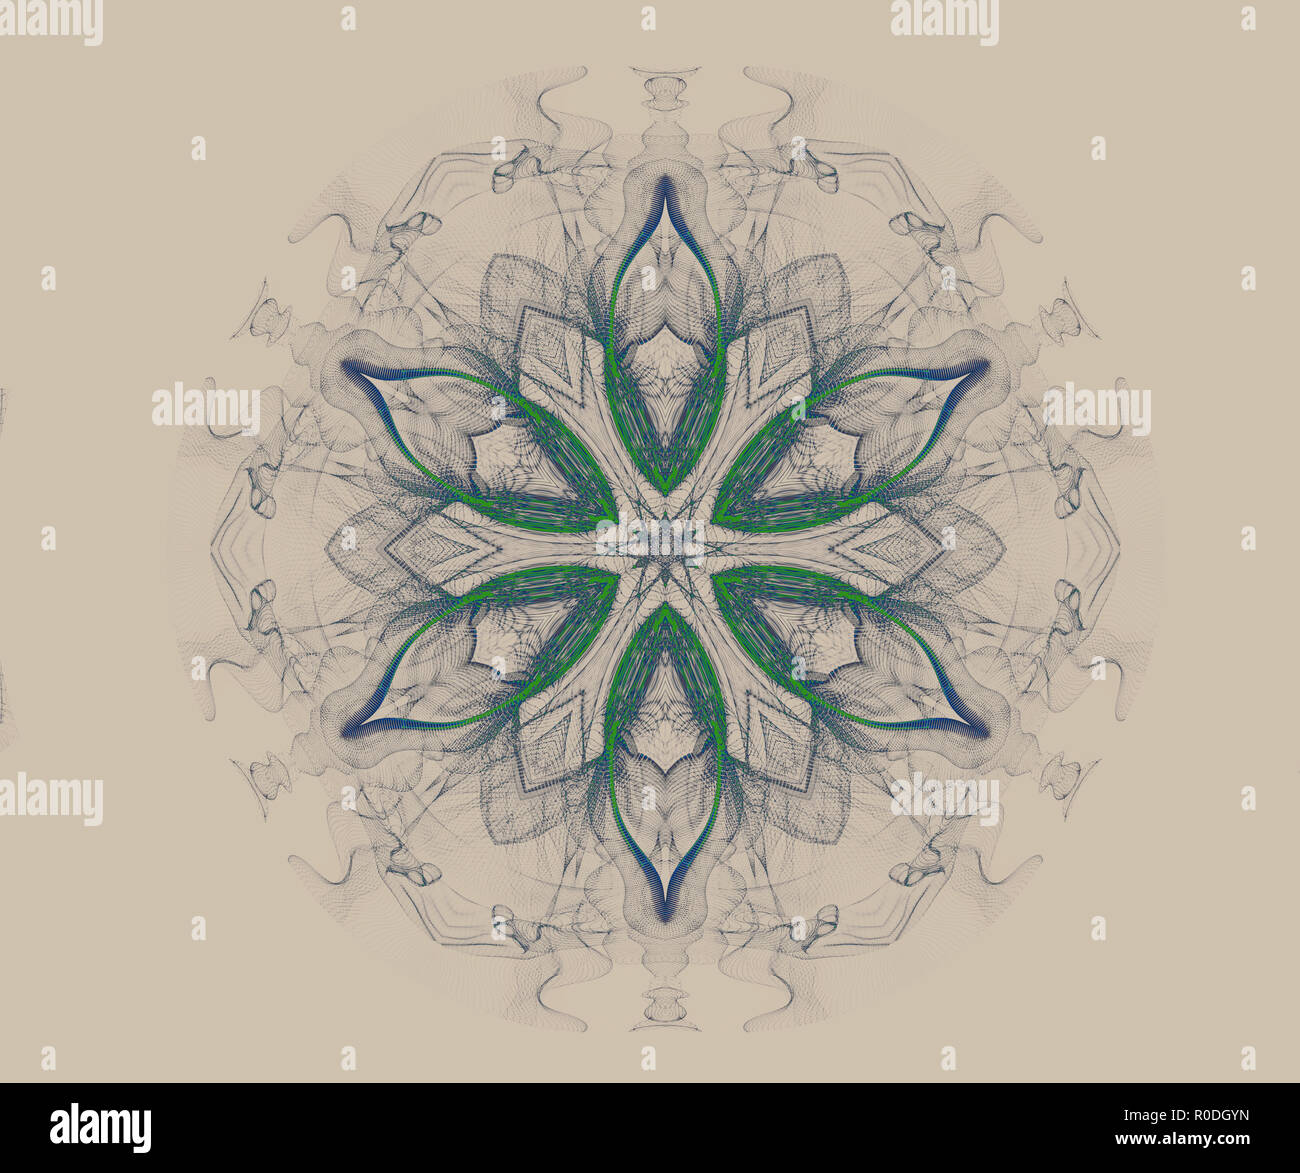 Patterned Holiday Star on a Neutral Background Stock Photo